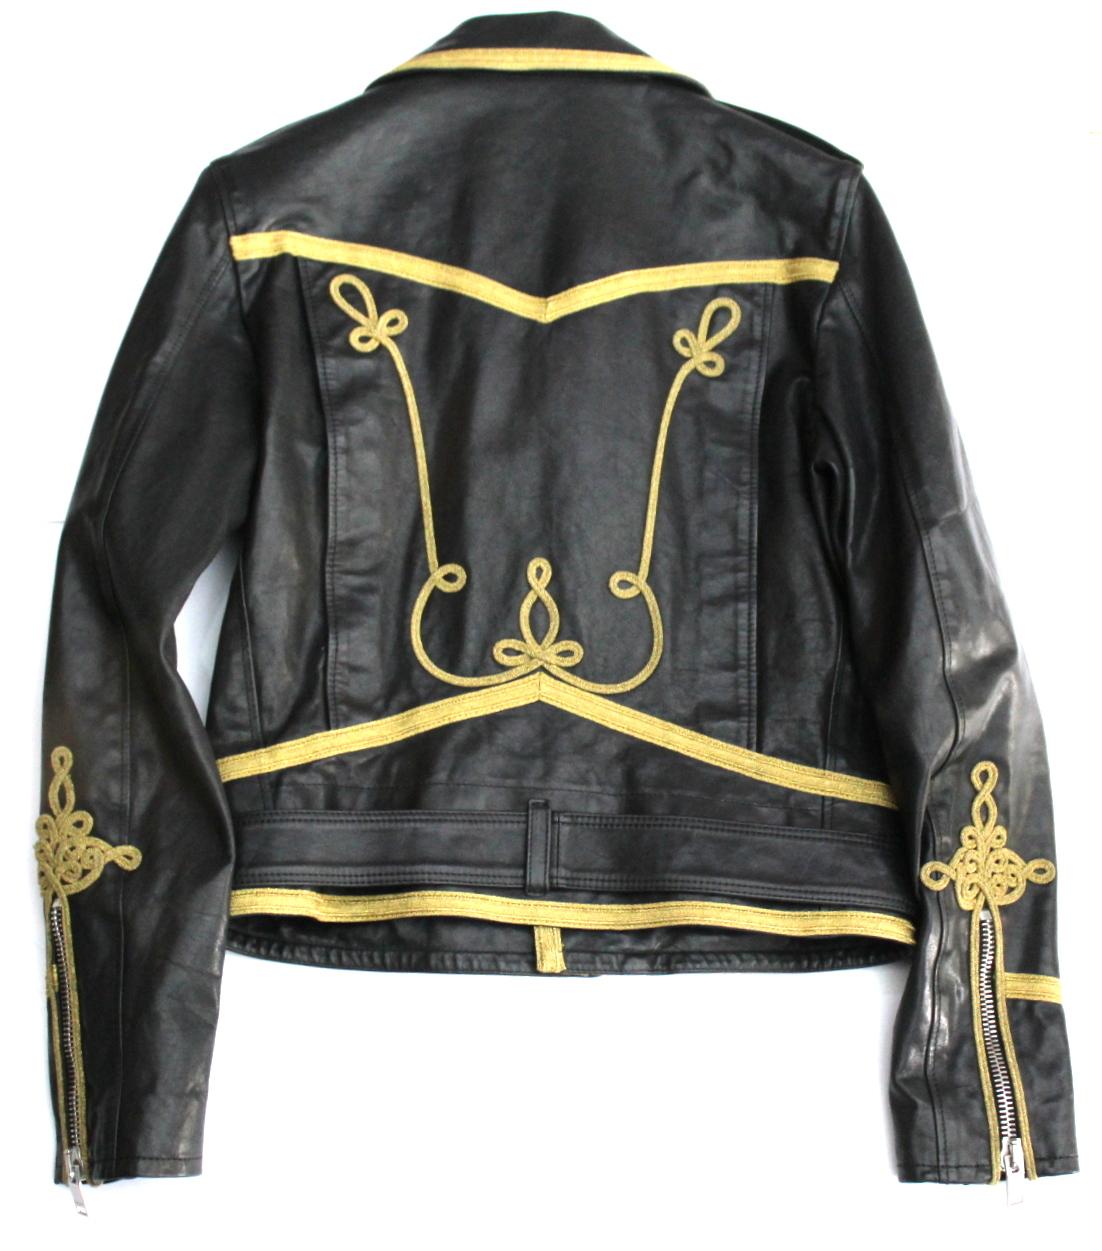 Saint Laurent black leather jacket with golden decorations and silver metal parts. Zip closure. Perfect for a variety of occasions.
It is in excellent condition. SIZE S, tight fitting.